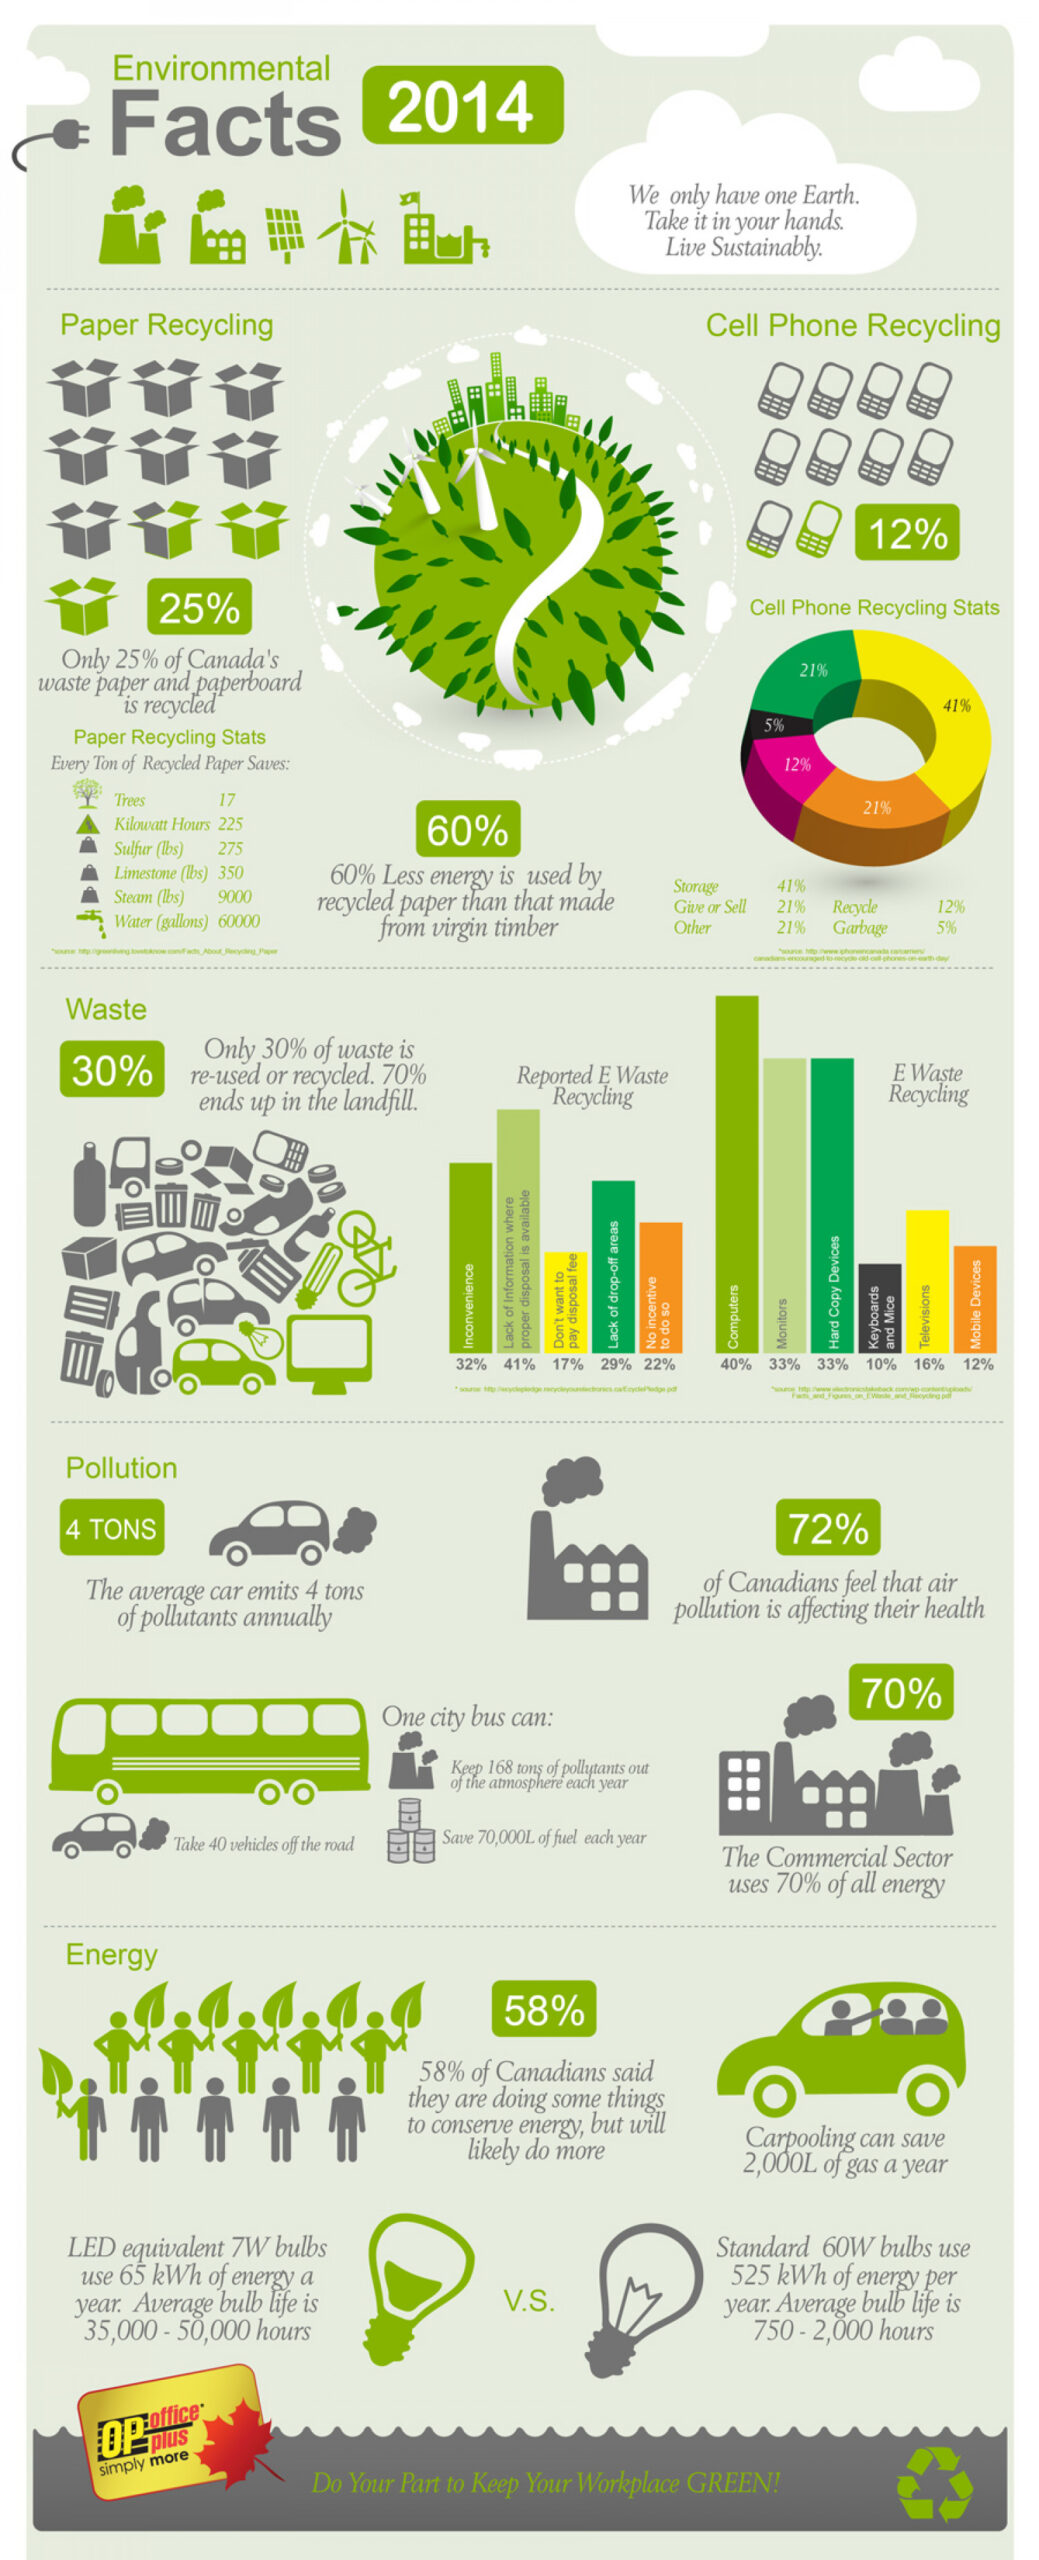 24 hours of saving energy Earth Day Infographic | Products | ENERGY STAR